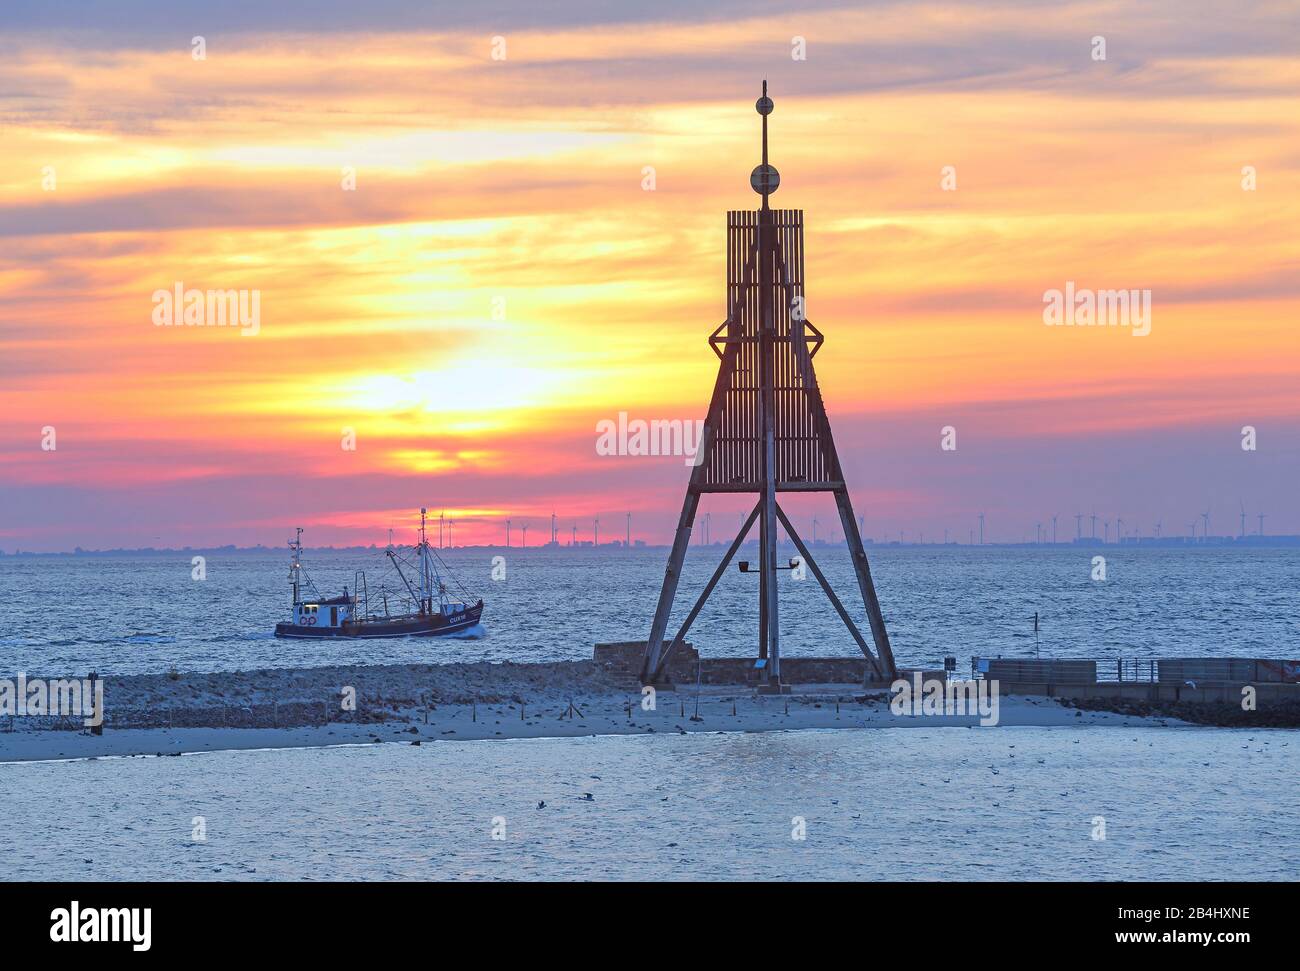 Seezeichen Kugelbake at the Elbe estuary in the district Döse with trawler at sunrise, North Sea resort Cuxhaven, Elbe estuary, North Sea, North Sea coast, Lower Saxony, Germany Stock Photo